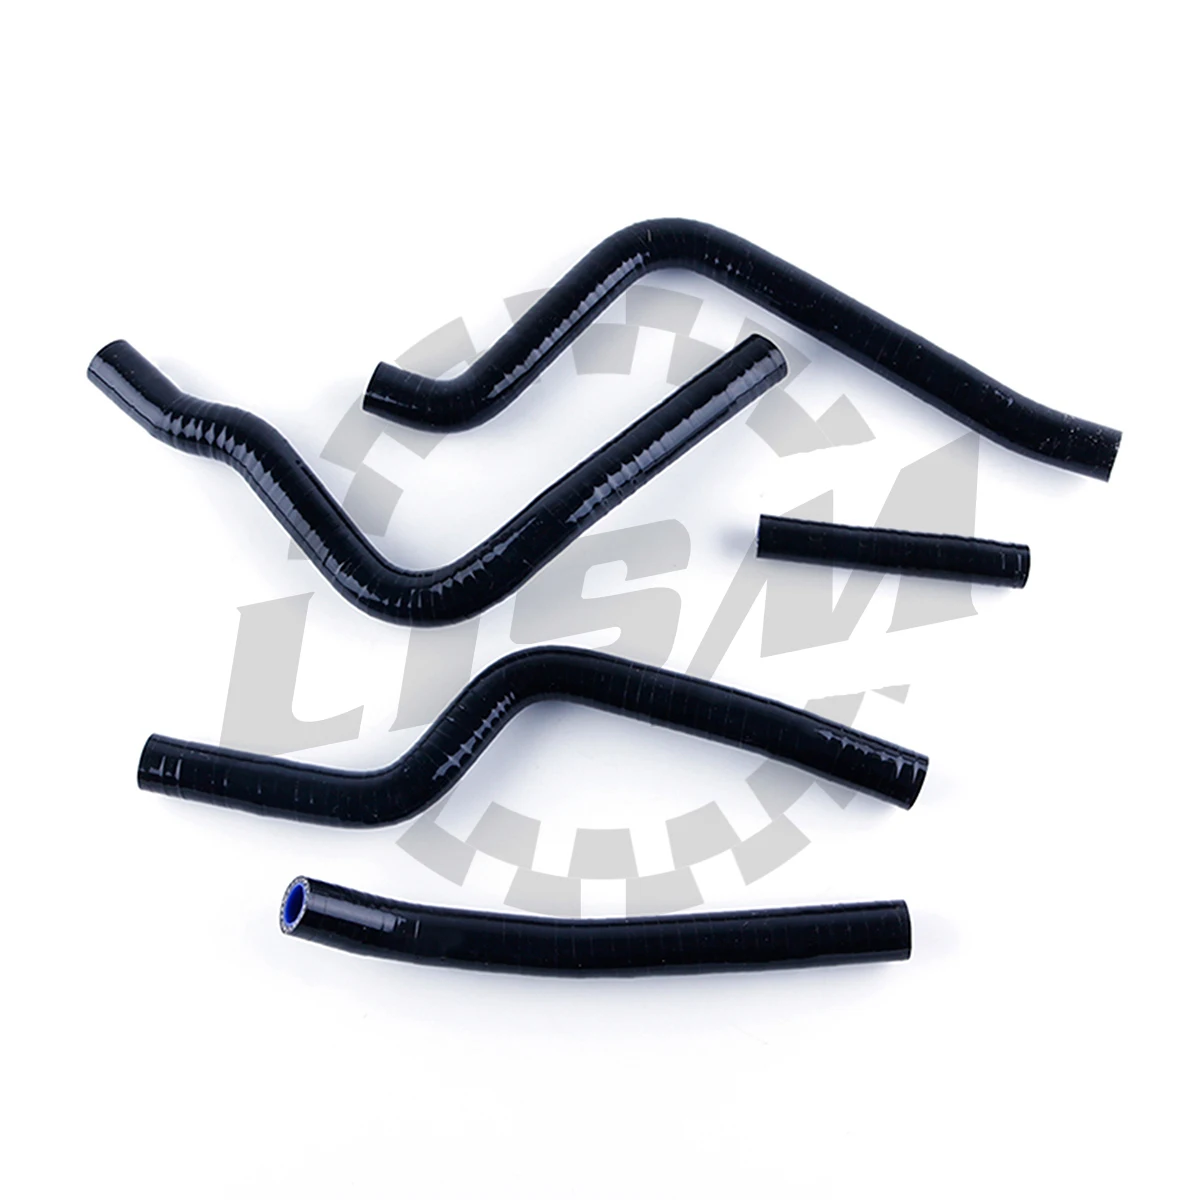 

5PCS FOR 1990-1993 Kawasaki KX125 KX 125 1991 1992 Silicone Radiator Coolant Hose Kit Pipe Upper and Lower